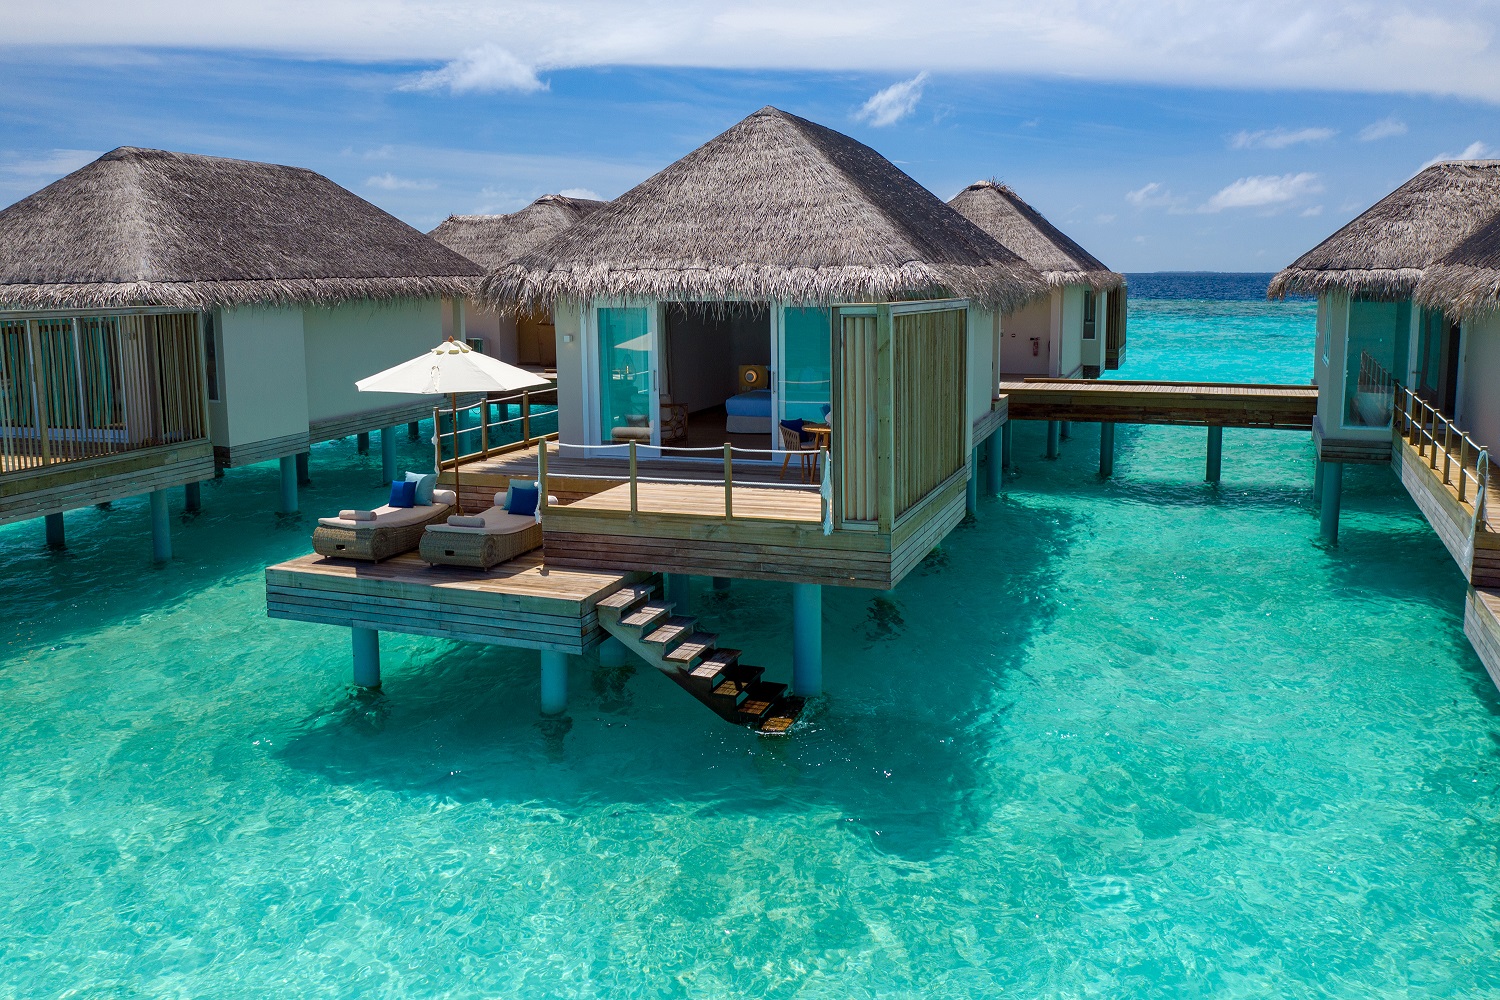 Save 35% and a free upgrade to a water villa on this last minute deal to the 5* Baglioni Resort Maldives!